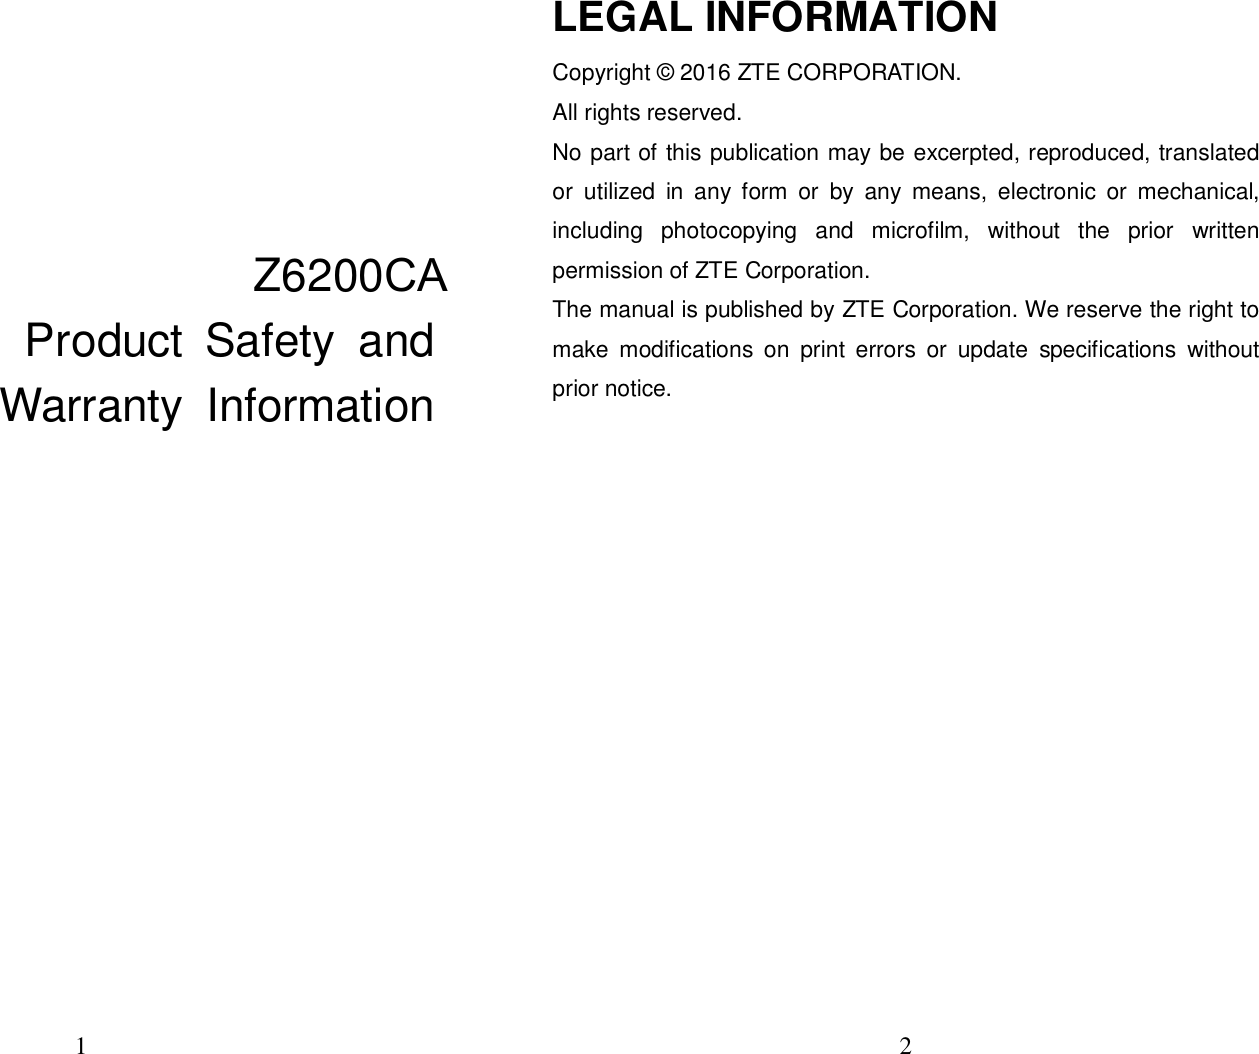 1 Z6200CA Product  Safety  and Warranty  Information 2 LEGAL INFORMATION Copyright © 2016 ZTE CORPORATION. All rights reserved.   No part of this publication may be excerpted, reproduced, translated or  utilized  in  any  form  or  by  any  means,  electronic  or  mechanical, including  photocopying  and  microfilm,  without  the  prior  written permission of ZTE Corporation. The manual is published by ZTE Corporation. We reserve the right to make  modifications  on  print  errors  or  update  specifications  without prior notice. 